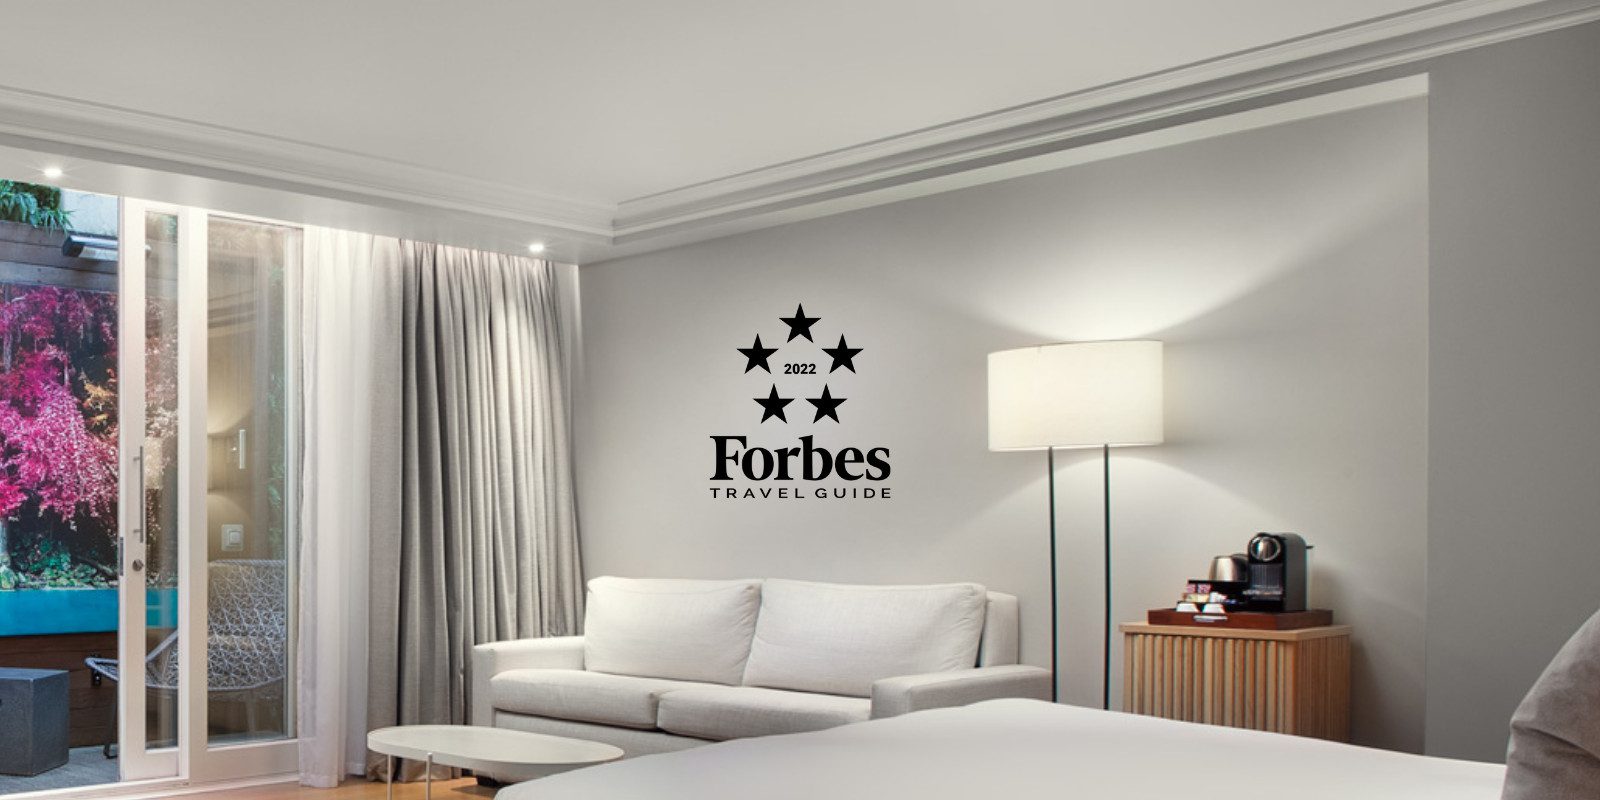 The Prince Akatoki London awarded the five-star Forbes Rating, one of only 21 Forbes five-star rated hotels in London.